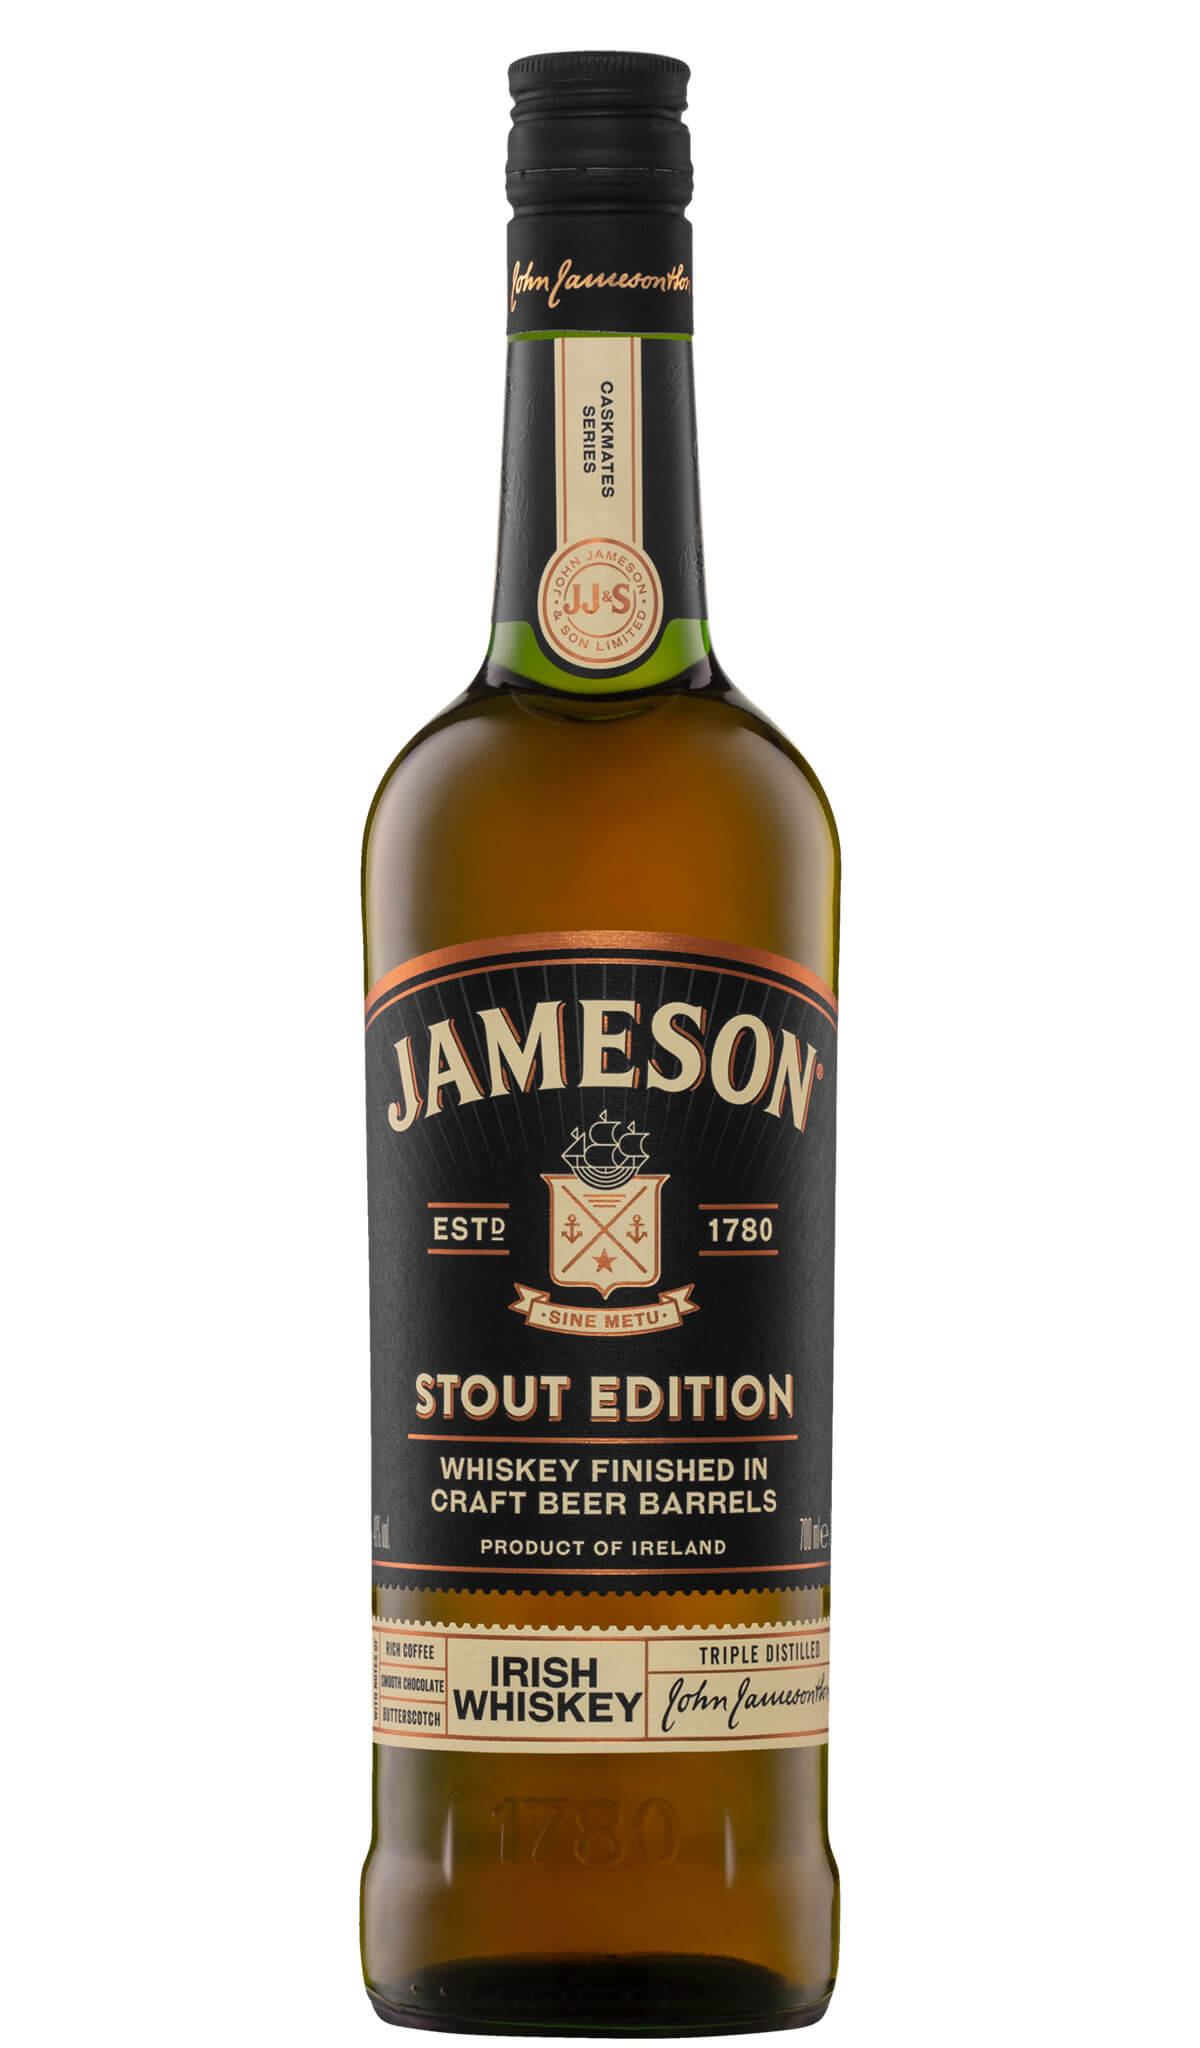 Find out more or buy Jameson Stout Edition Irish Whiskey 700ml (Ireland) online at Wine Sellers Direct - Australia’s independent liquor specialists.